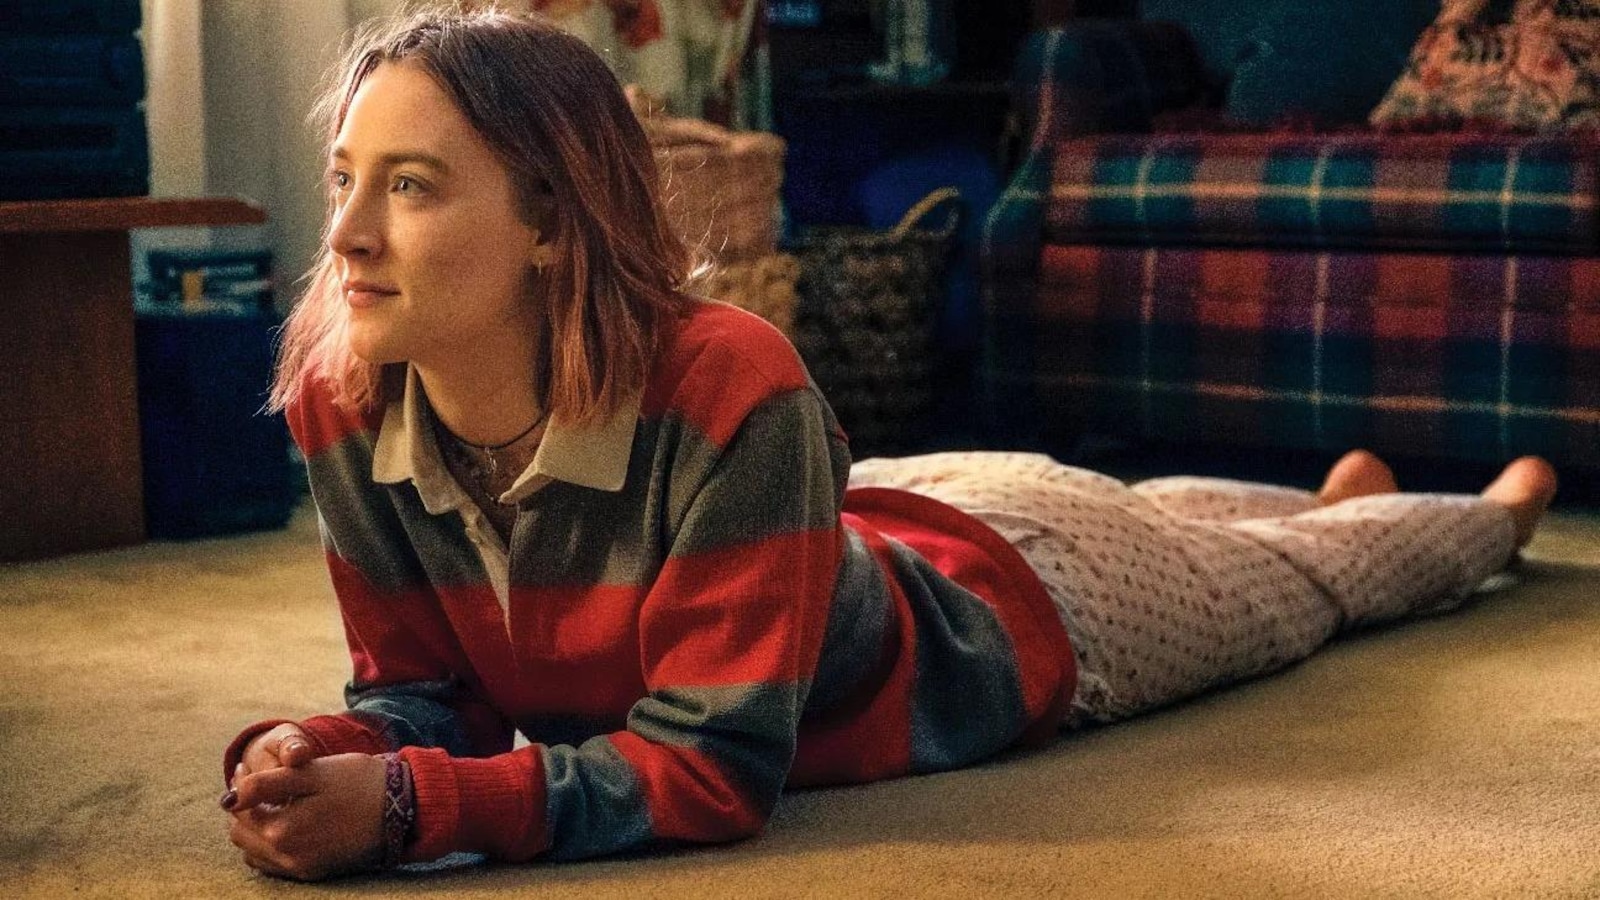 A young woman (Saoirse Ronan) is somewhere on her stomach, on the floor.